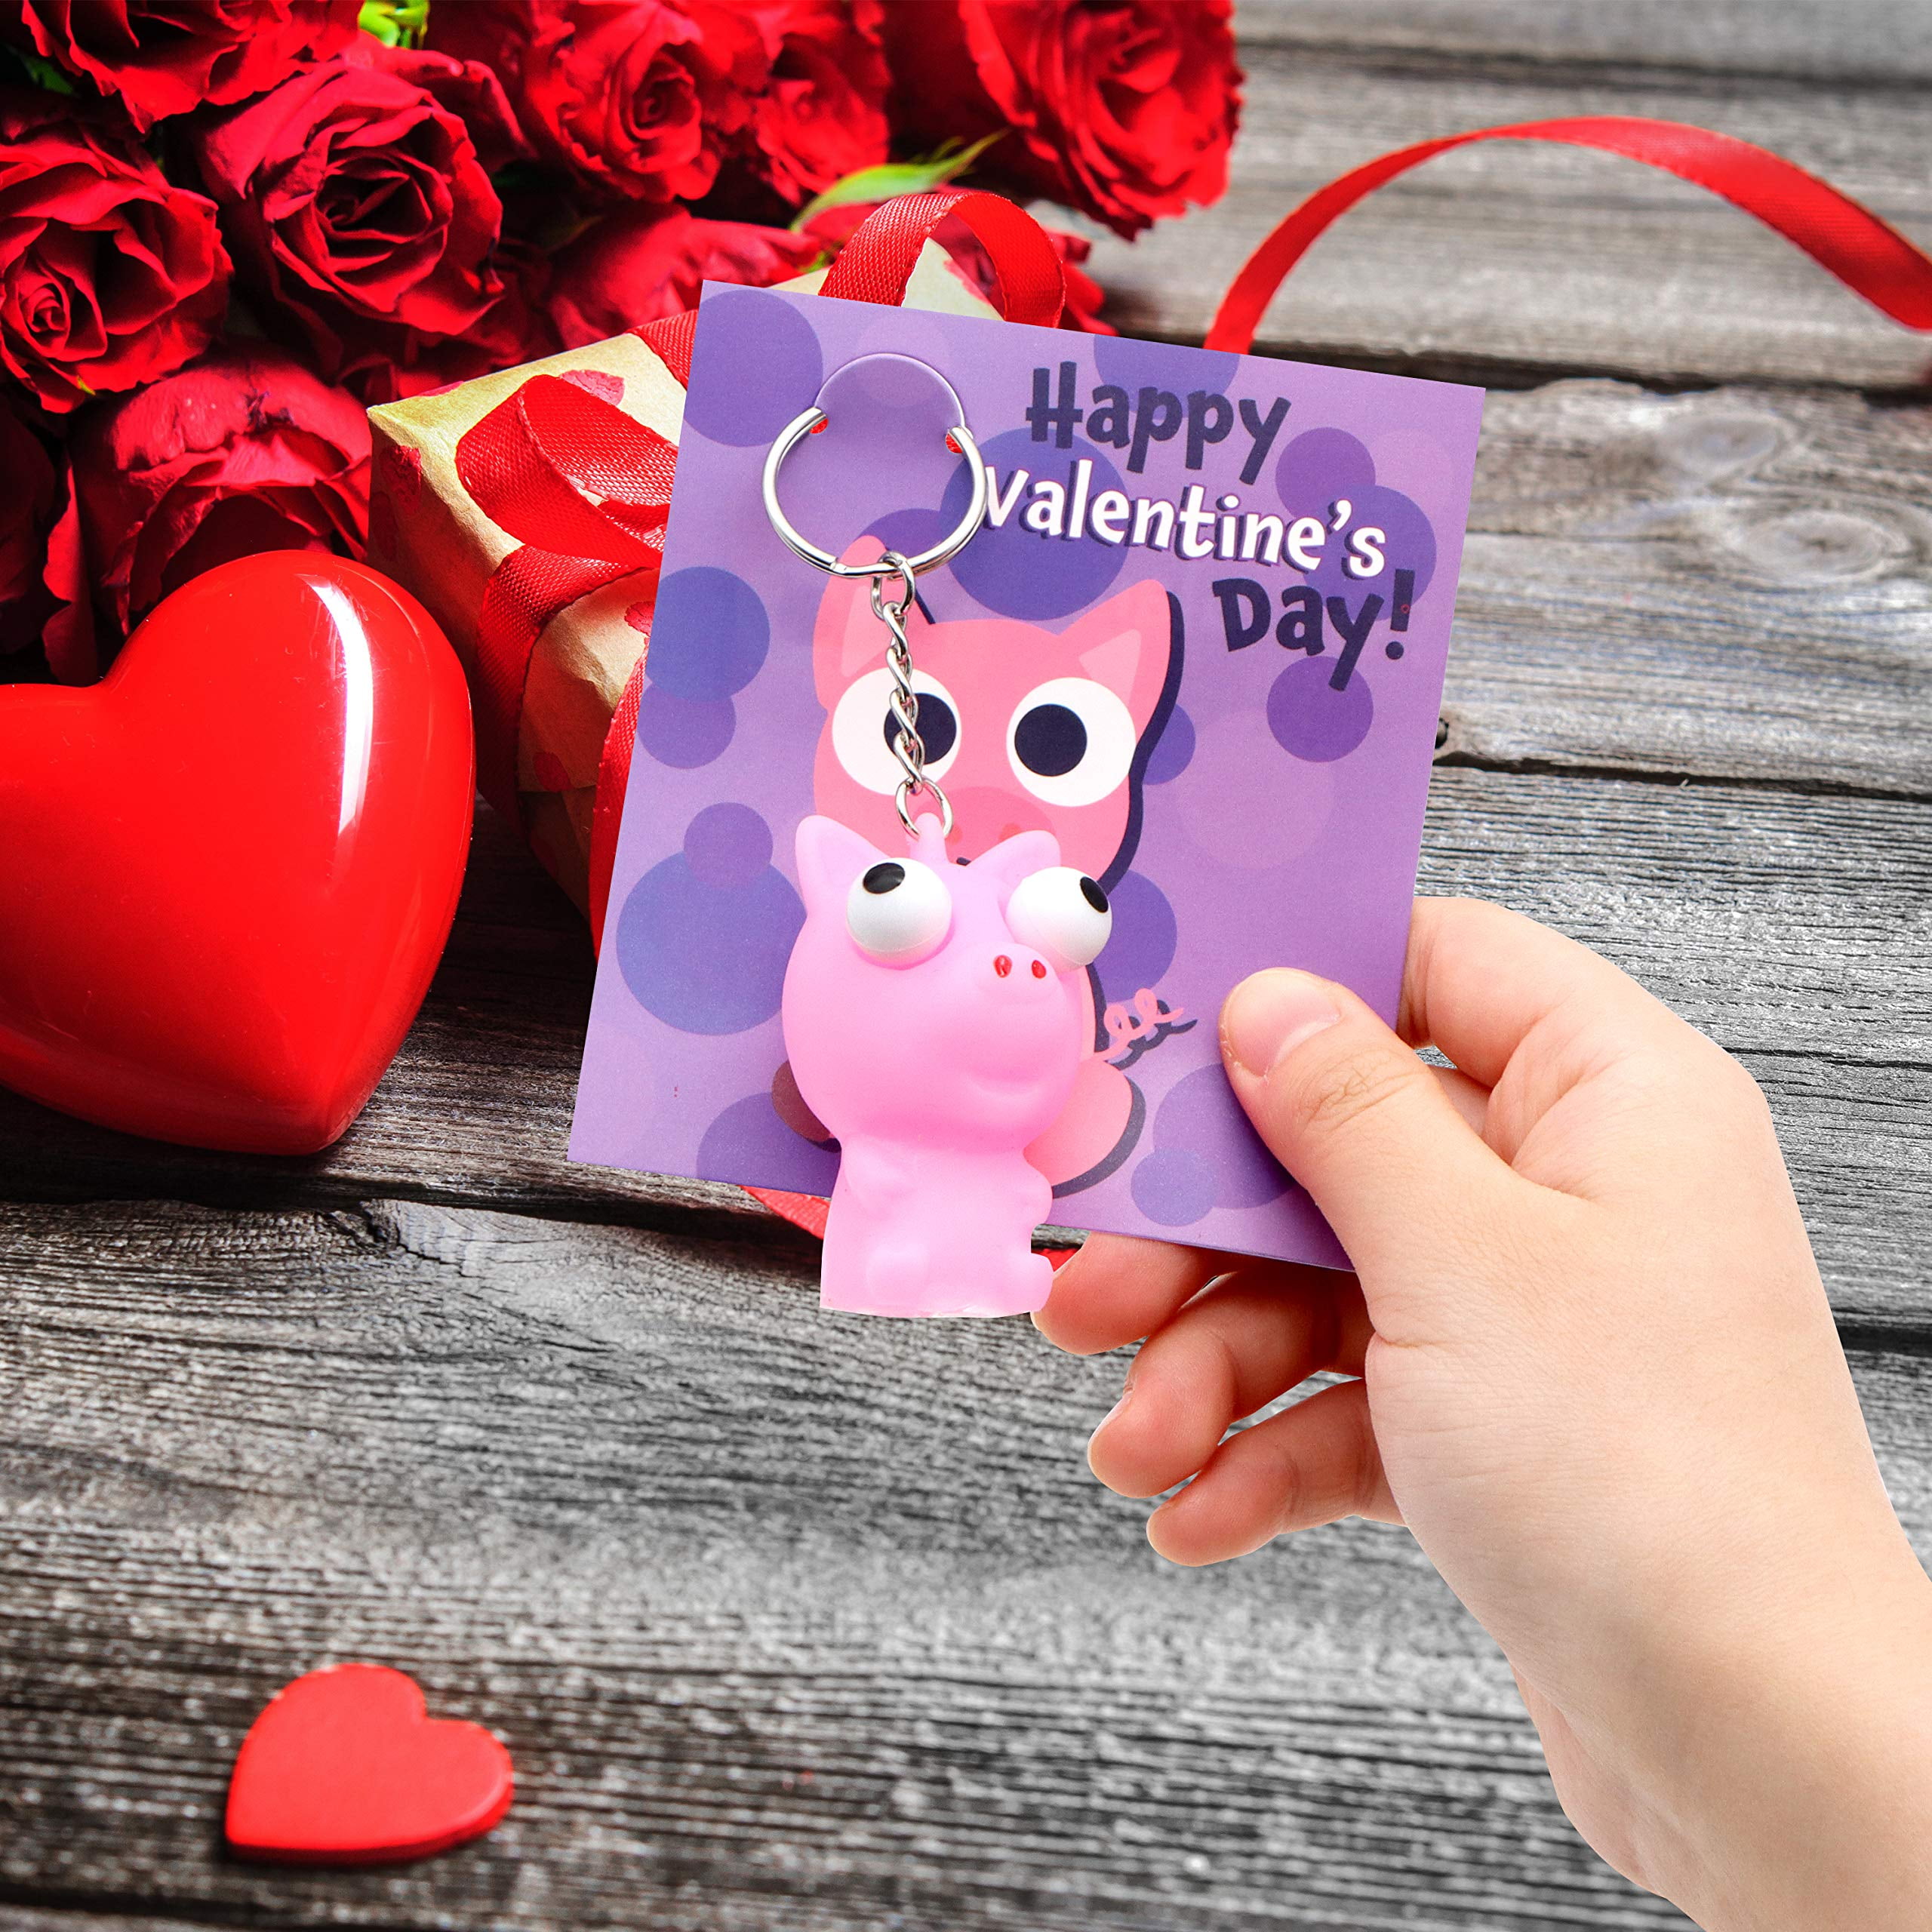 JOYIN 28 Pack Valentines Day Gifts Cards for Kids, Valentine's Greeting Cards with Stick-On Monster Googly Google Eyes Valentine Classroom Exchange